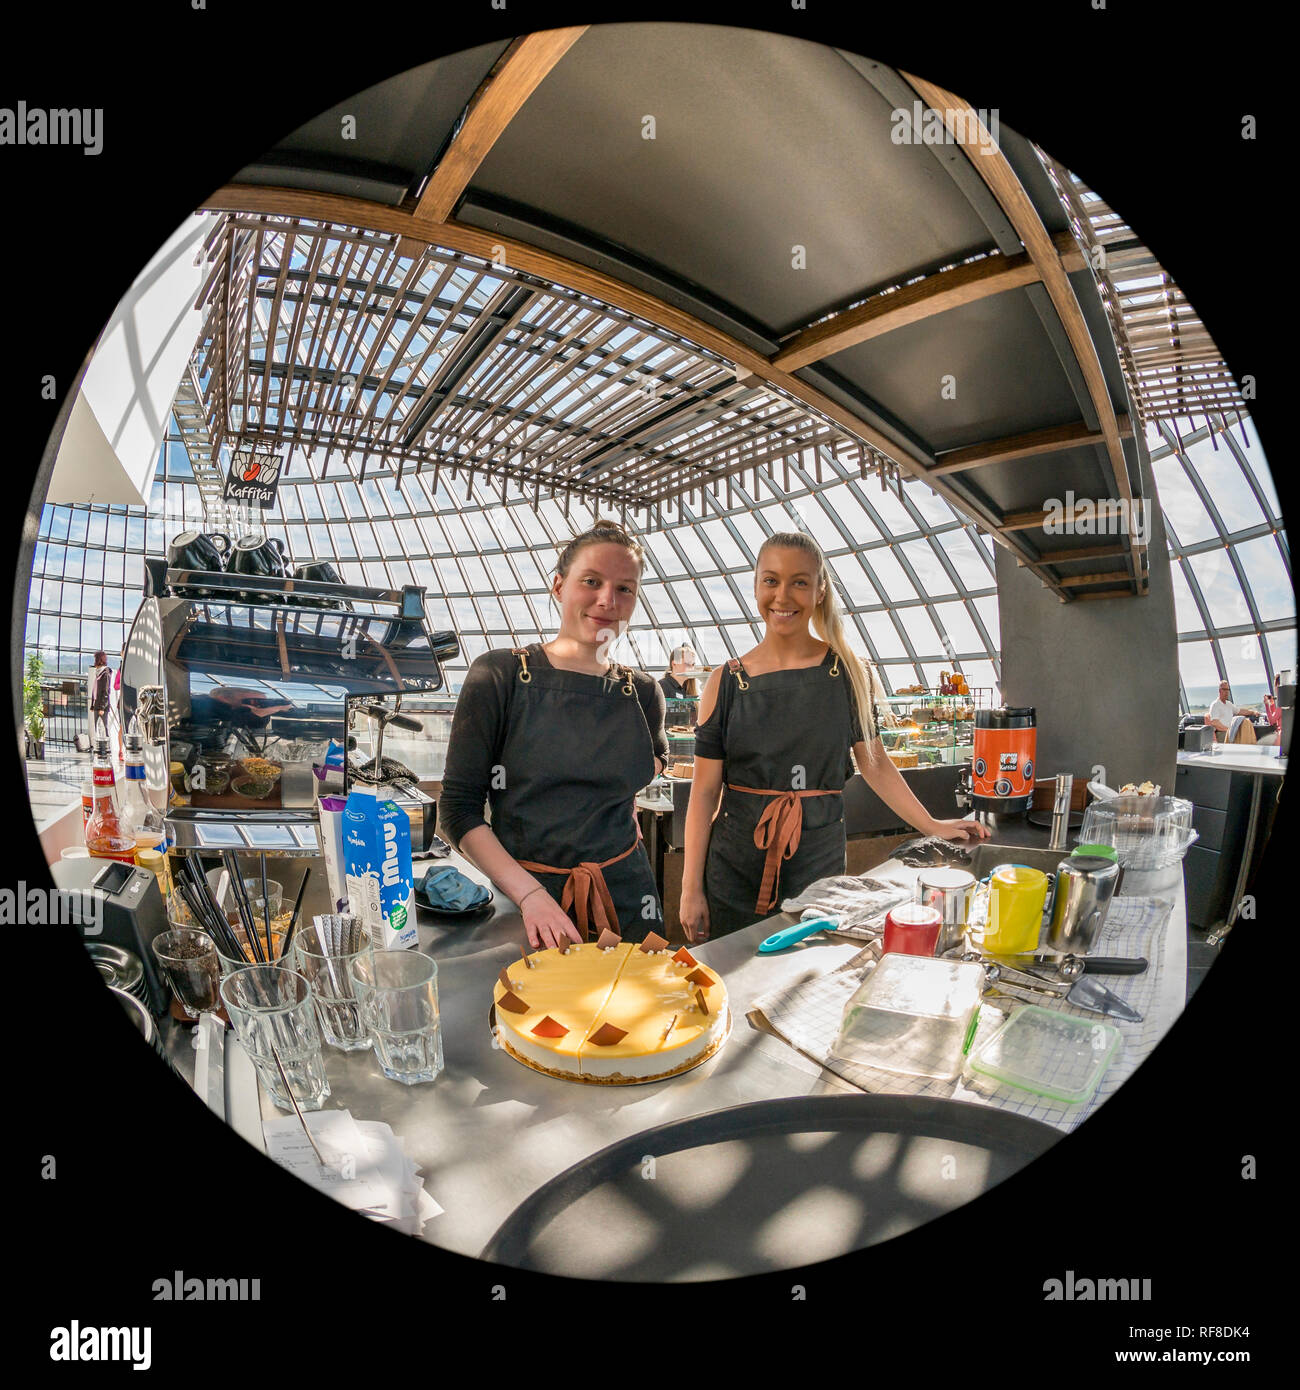 360 degrees - Cafe at The Perlan Museum (The Pearl) Reykjavik, Iceland. Stock Photo